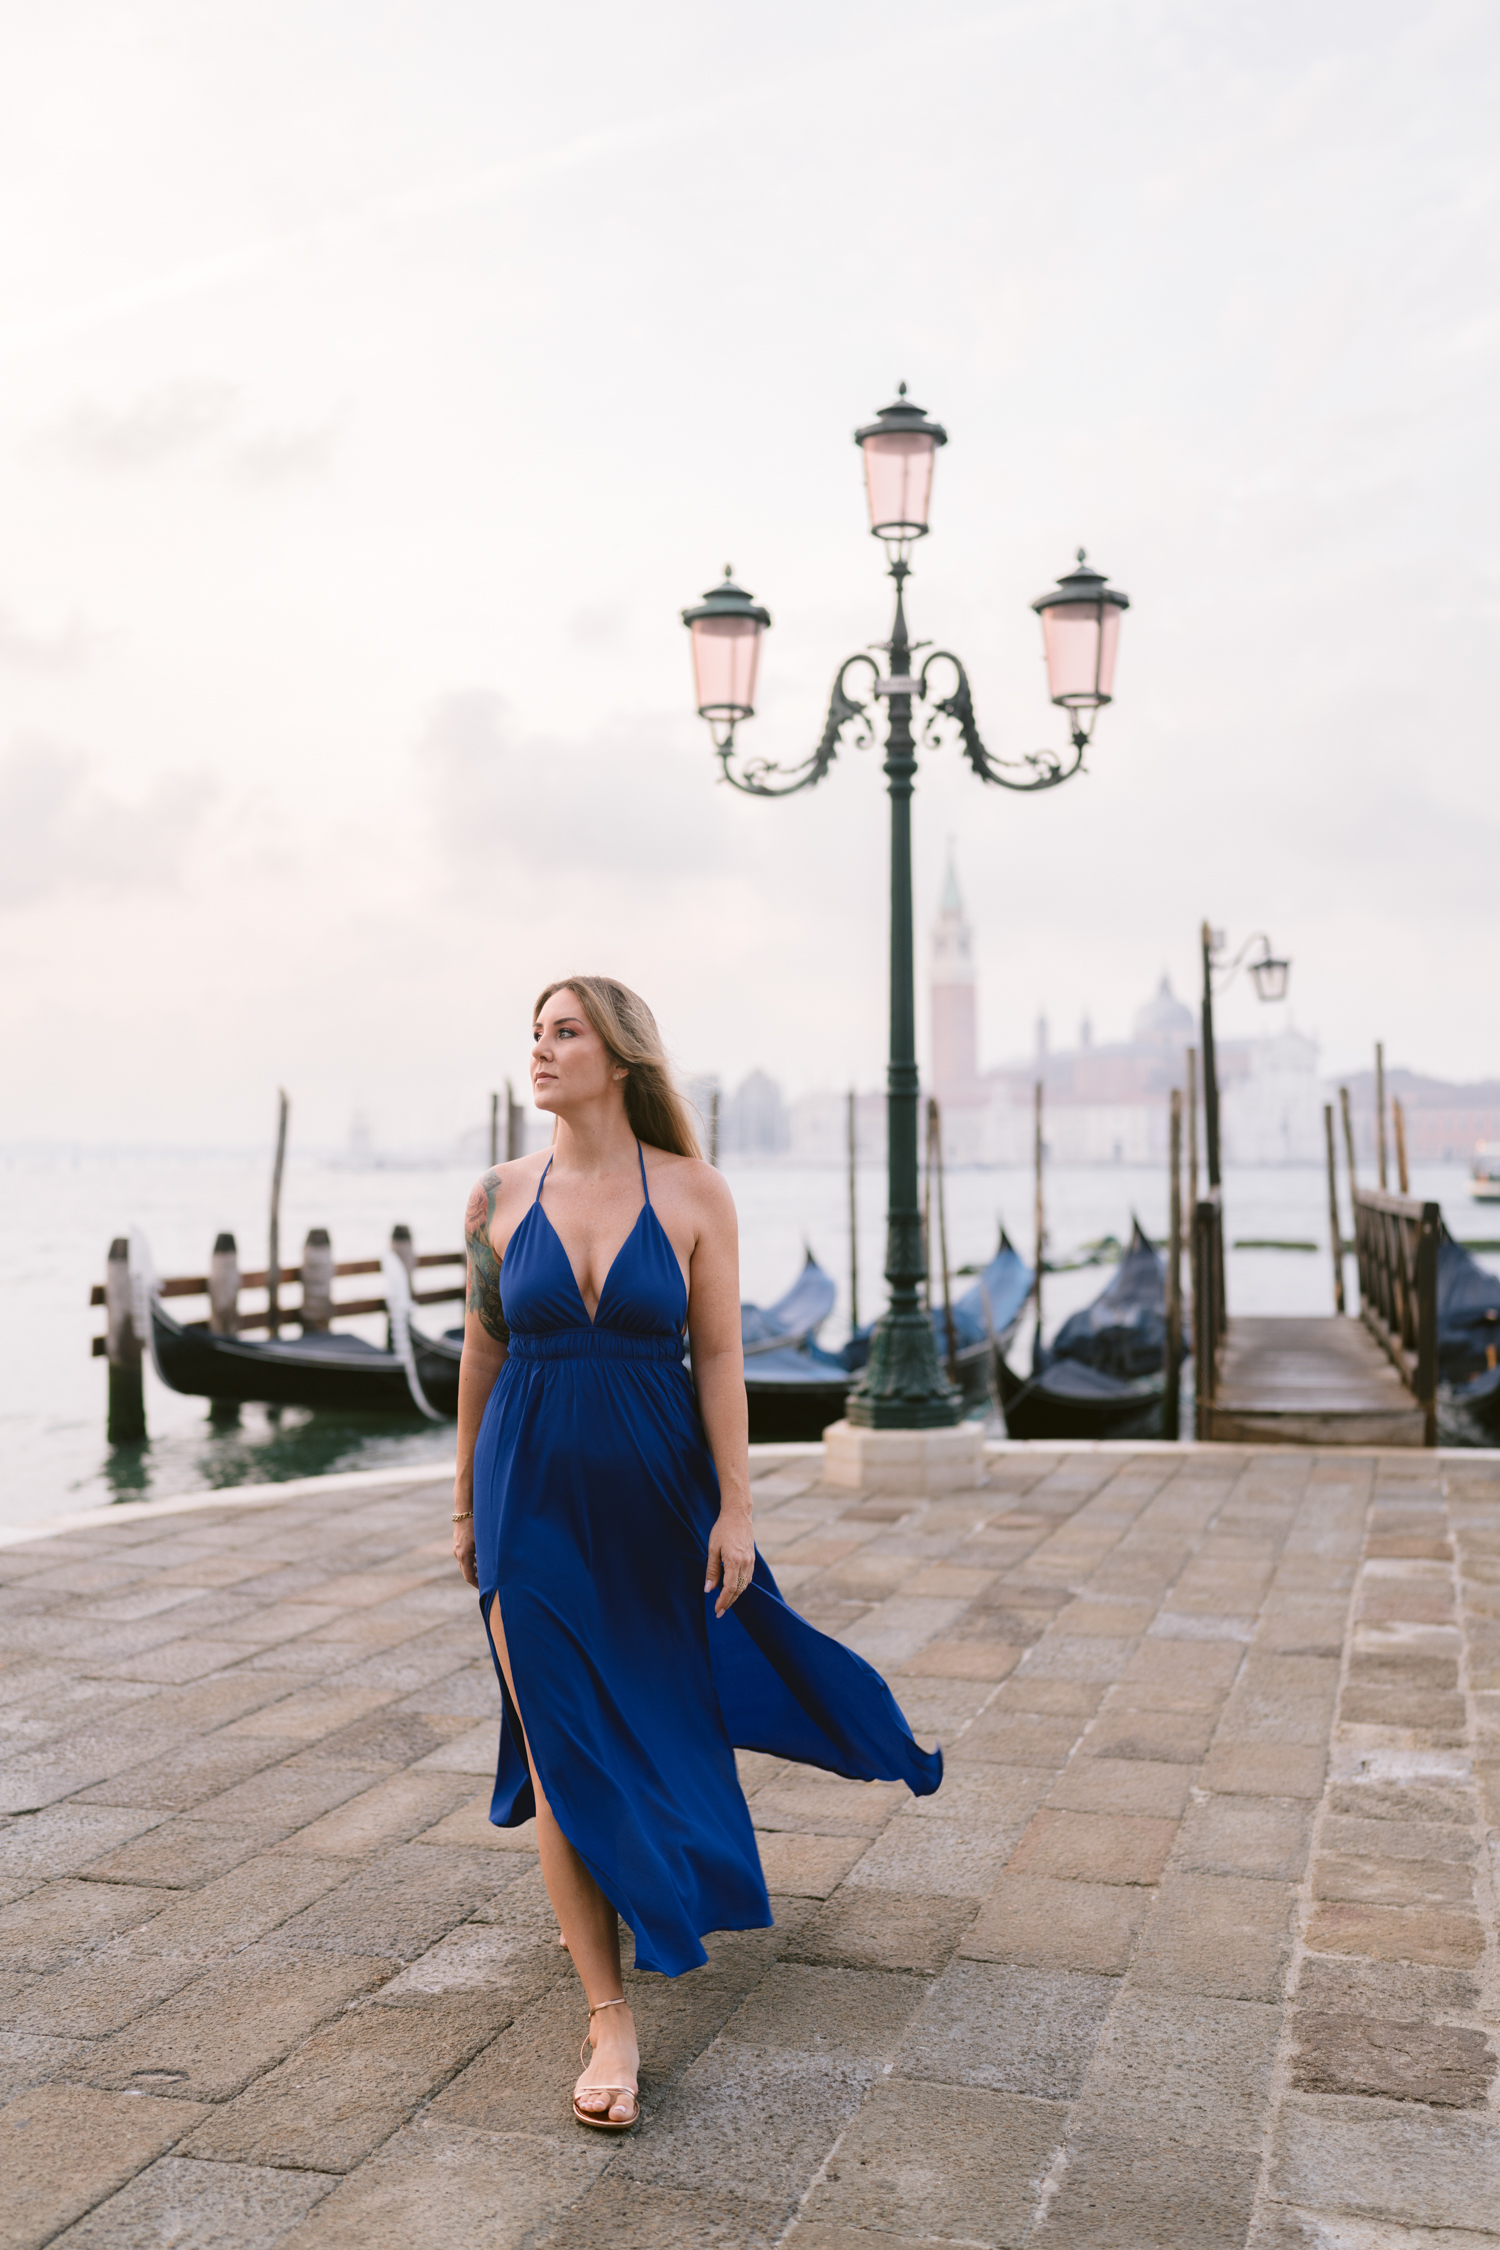 your memories in the picturesque streets of Venice with a talented portrait photographer. Perfect for bloggers and solo travelers looking for stunning photoshoots to document your journey. Book now and create beautiful, lasting memories!